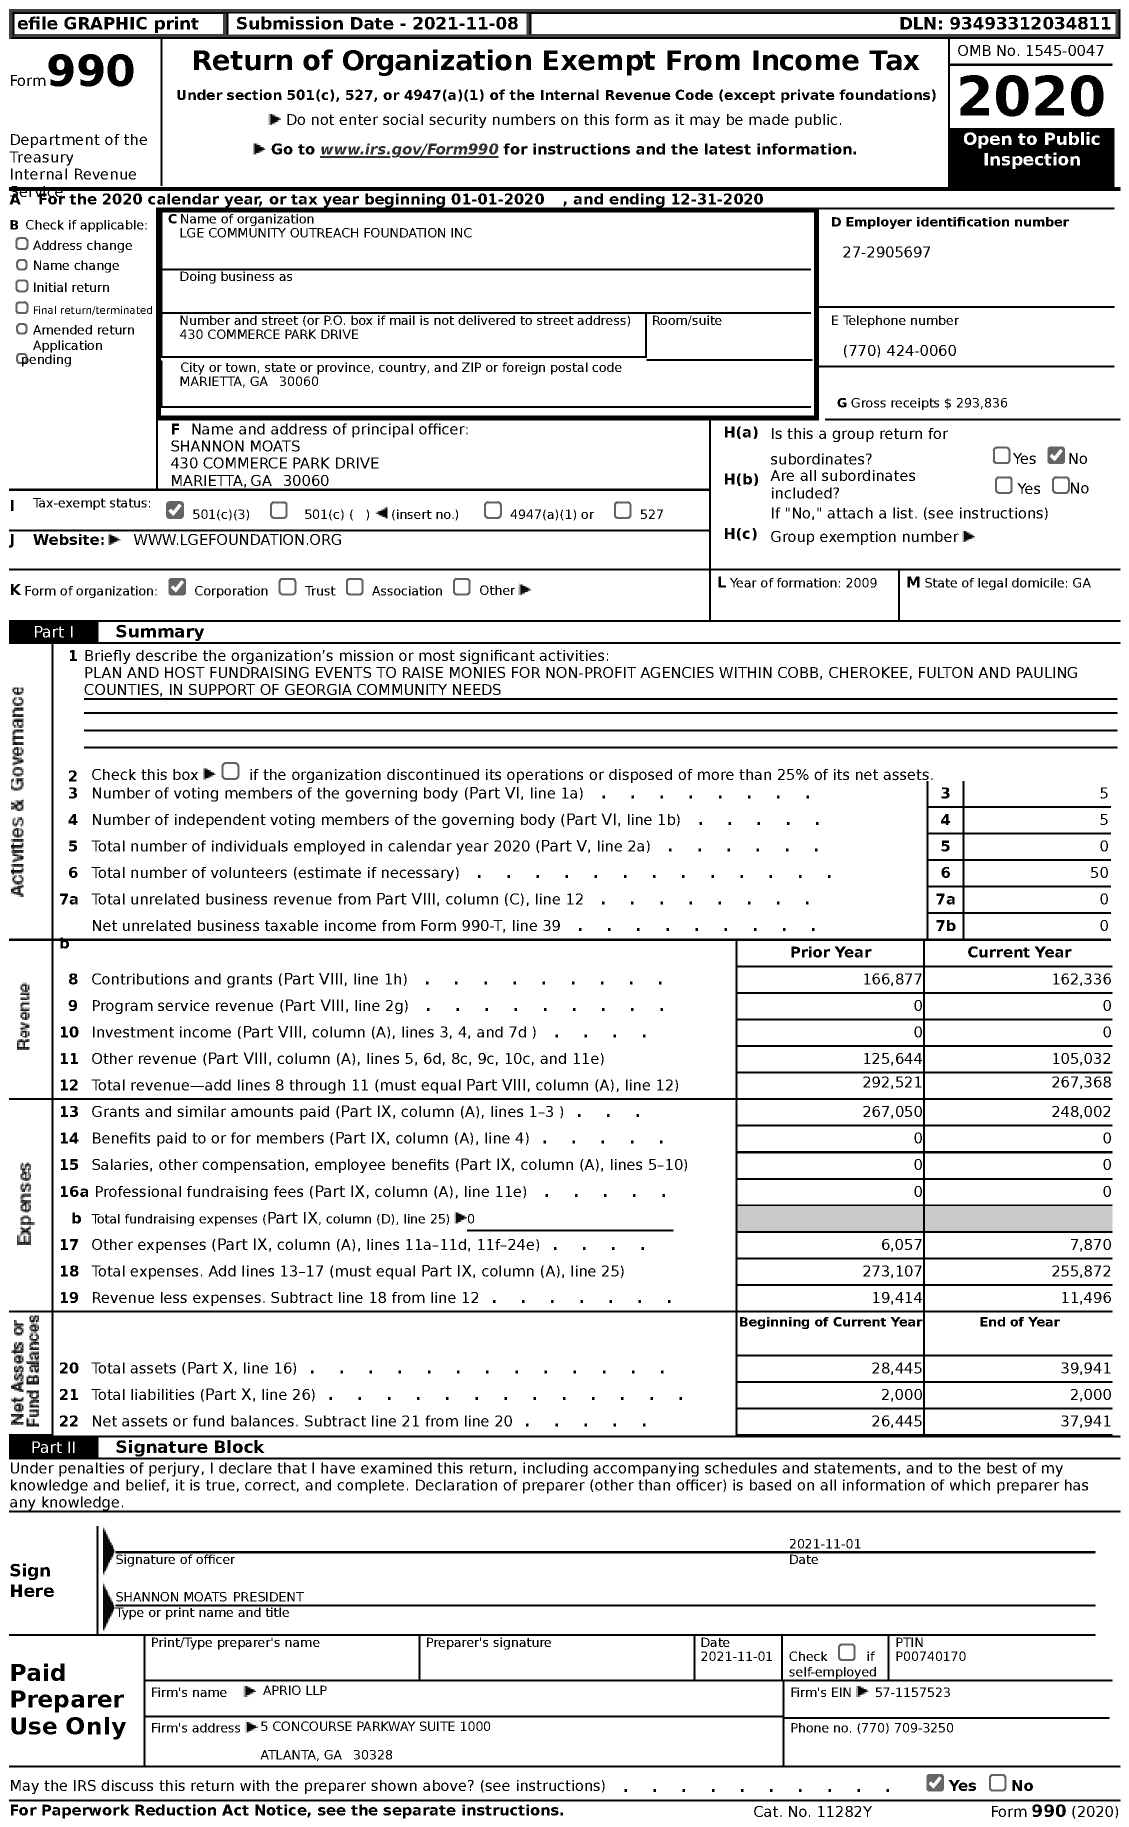 Image of first page of 2020 Form 990 for Lge Community Outreach Foundation